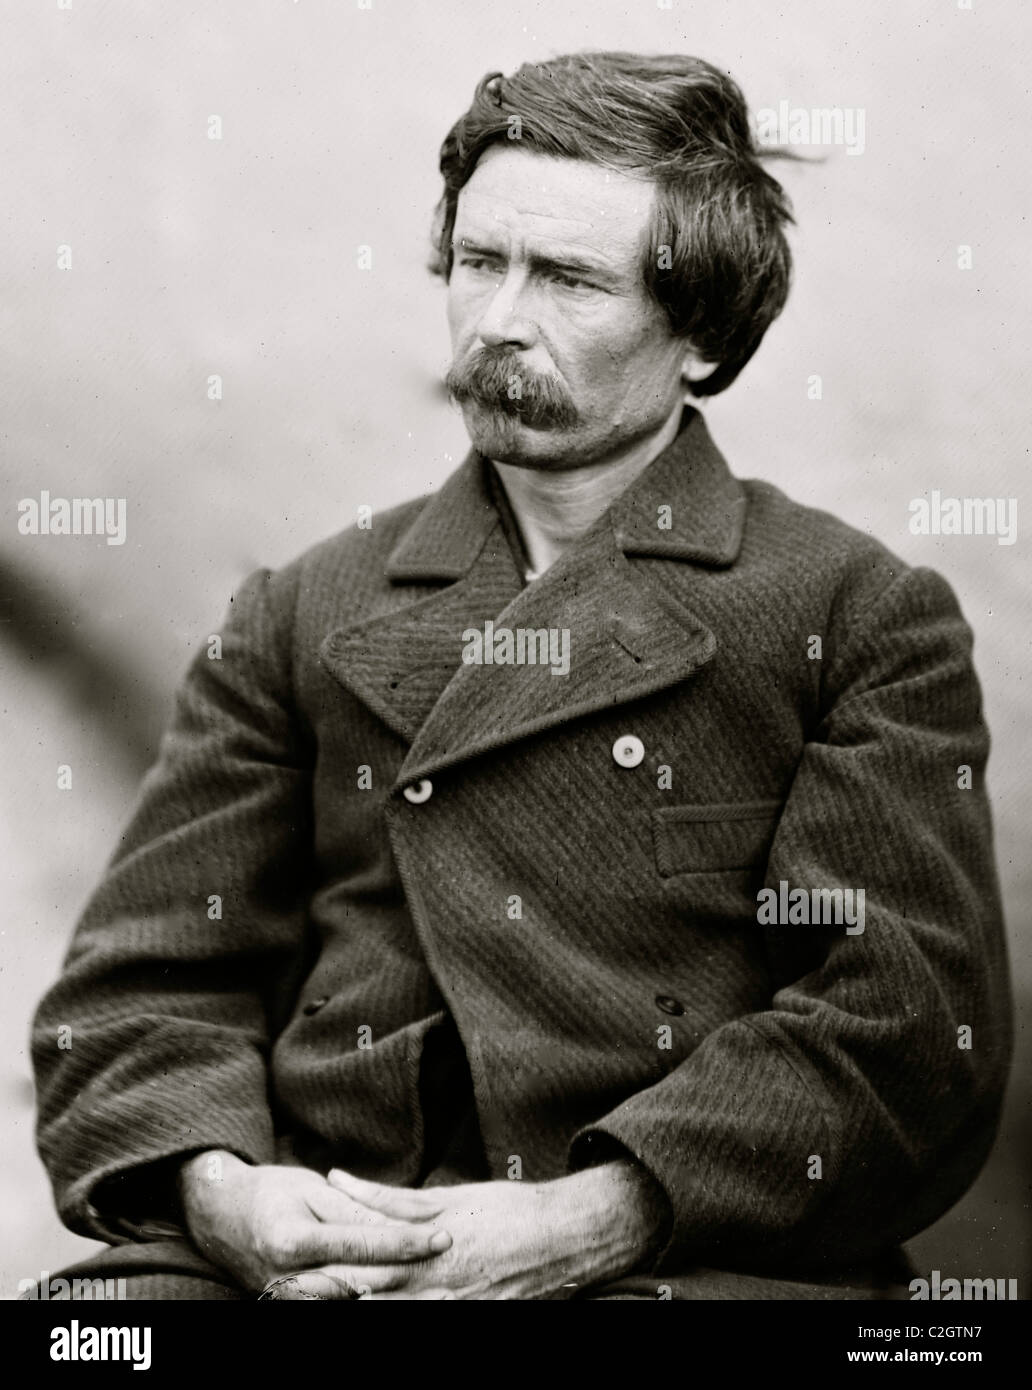 Washington Navy Yard, District of Columbia. Man arrested on suspicion of being one of the conspirators. Stock Photo